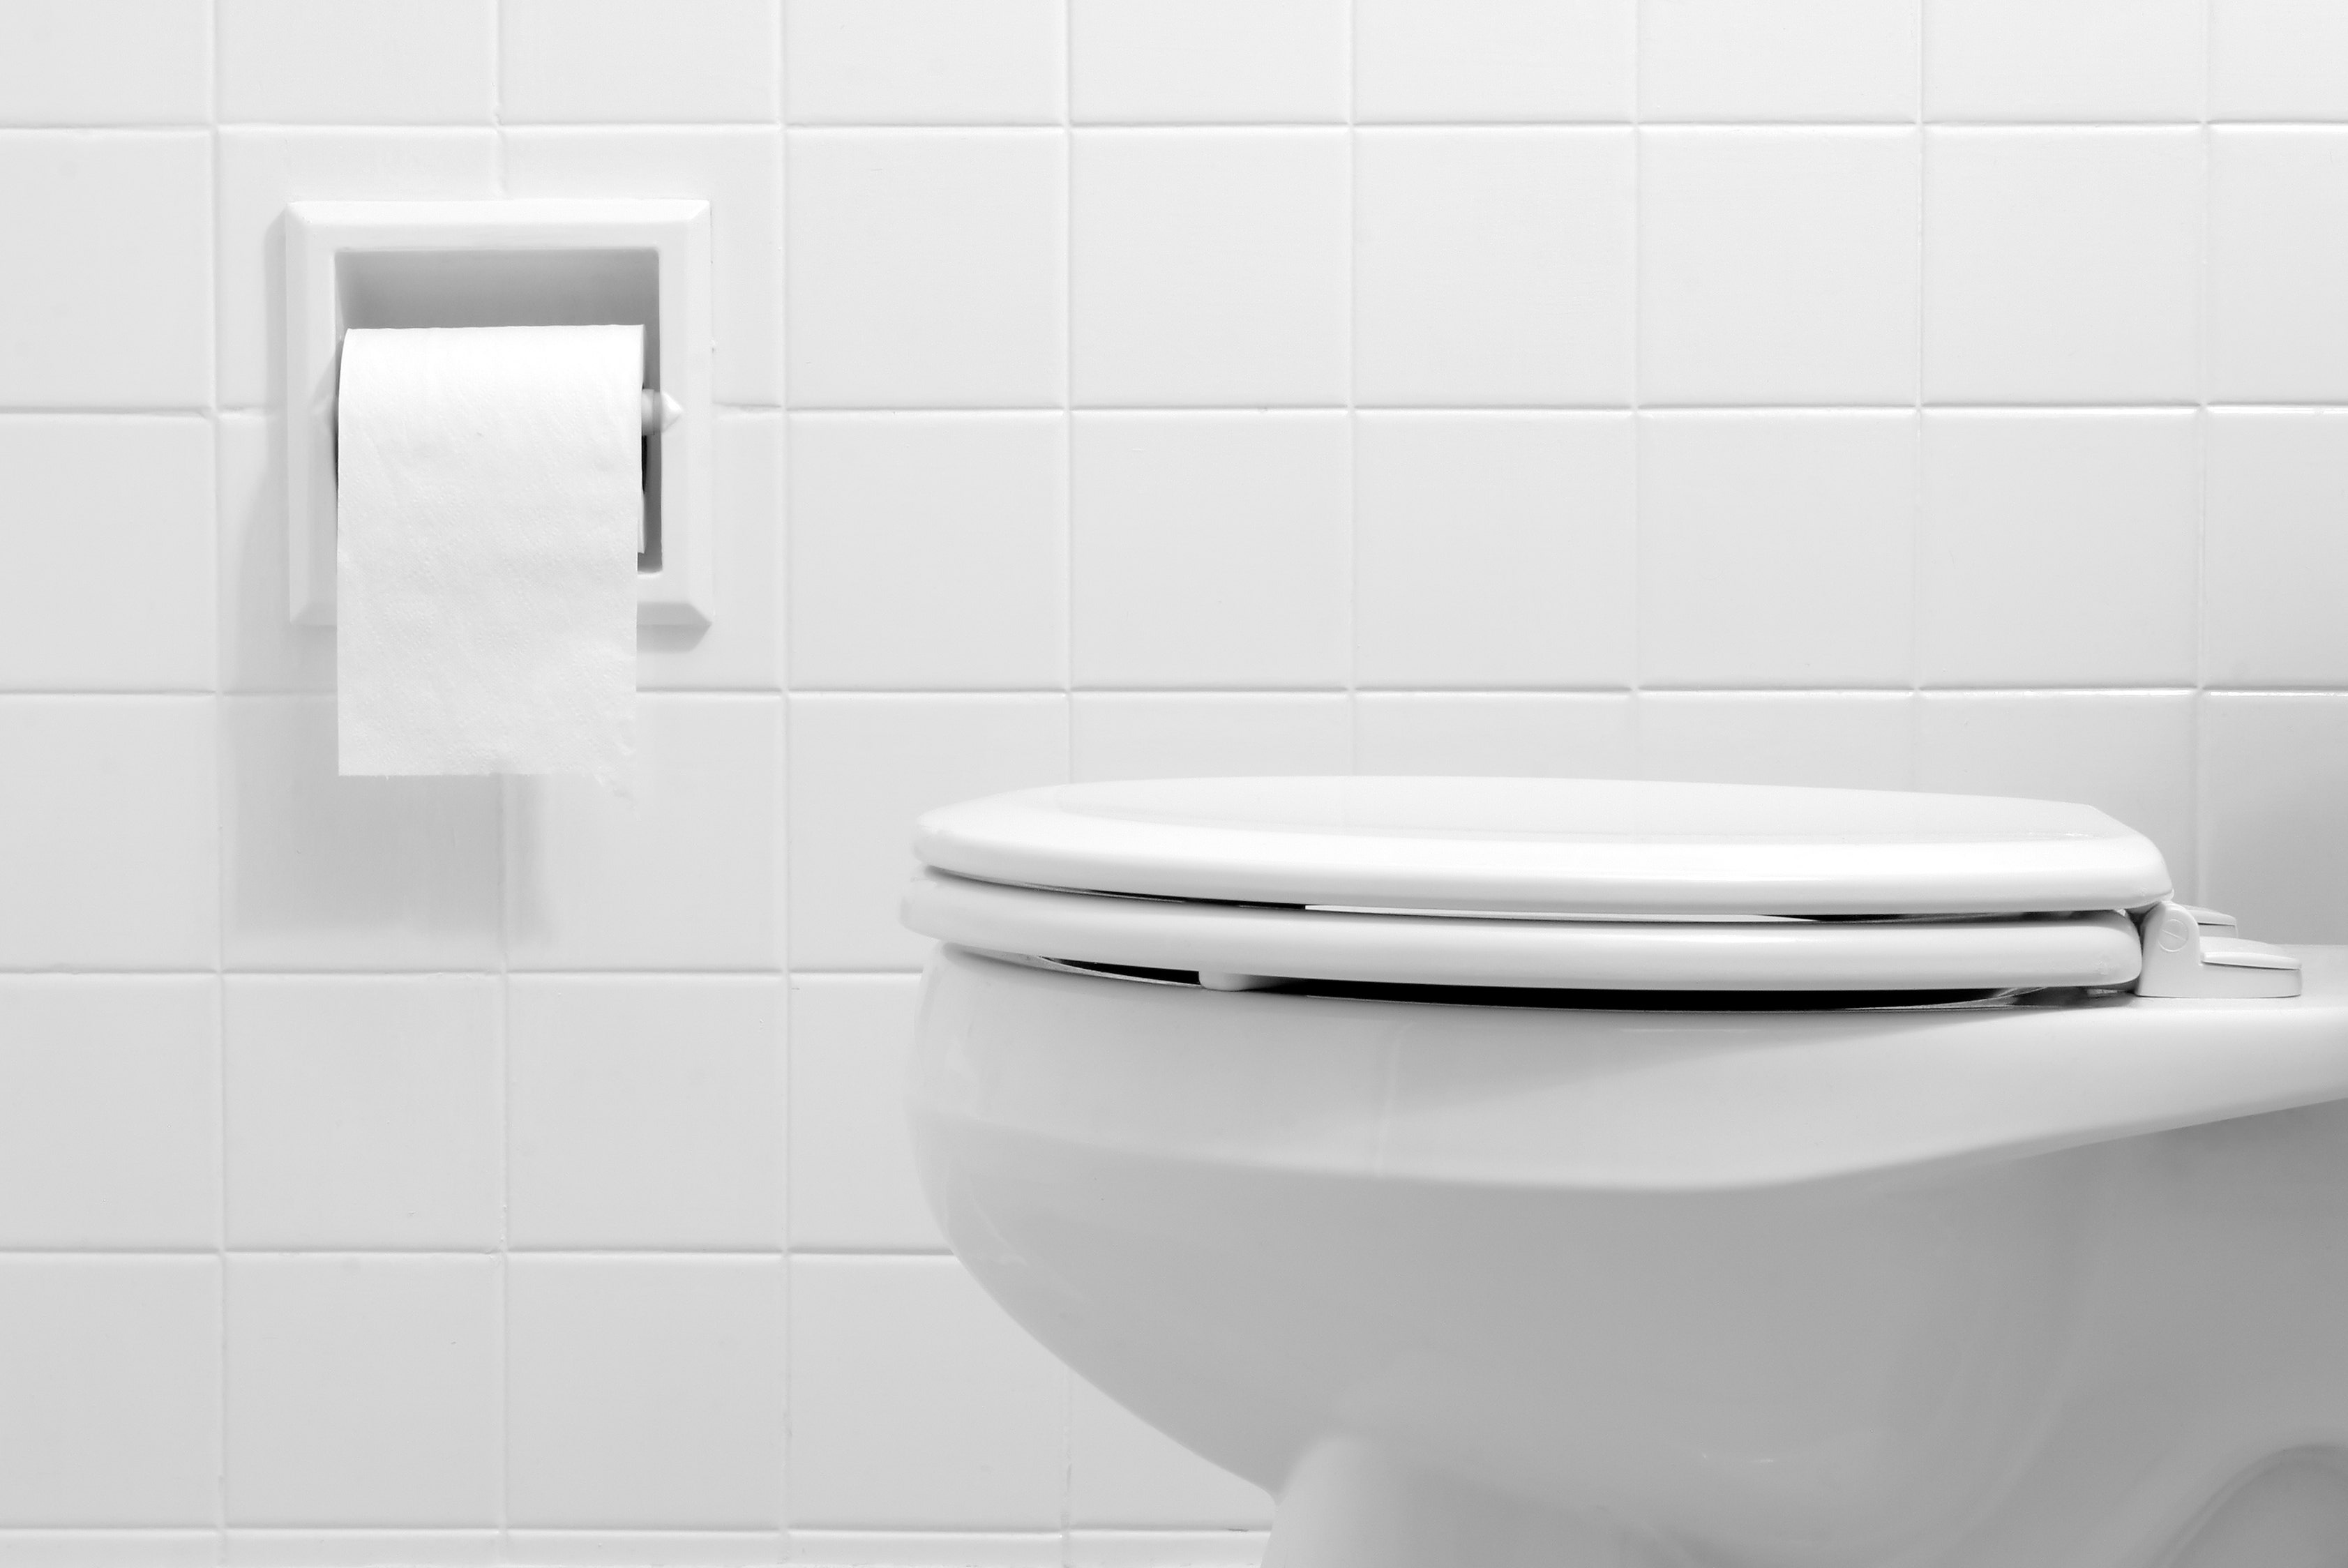 Toilet time: Is your mobile device affecting how long you’re in the bathroom? Experts reveal health risks